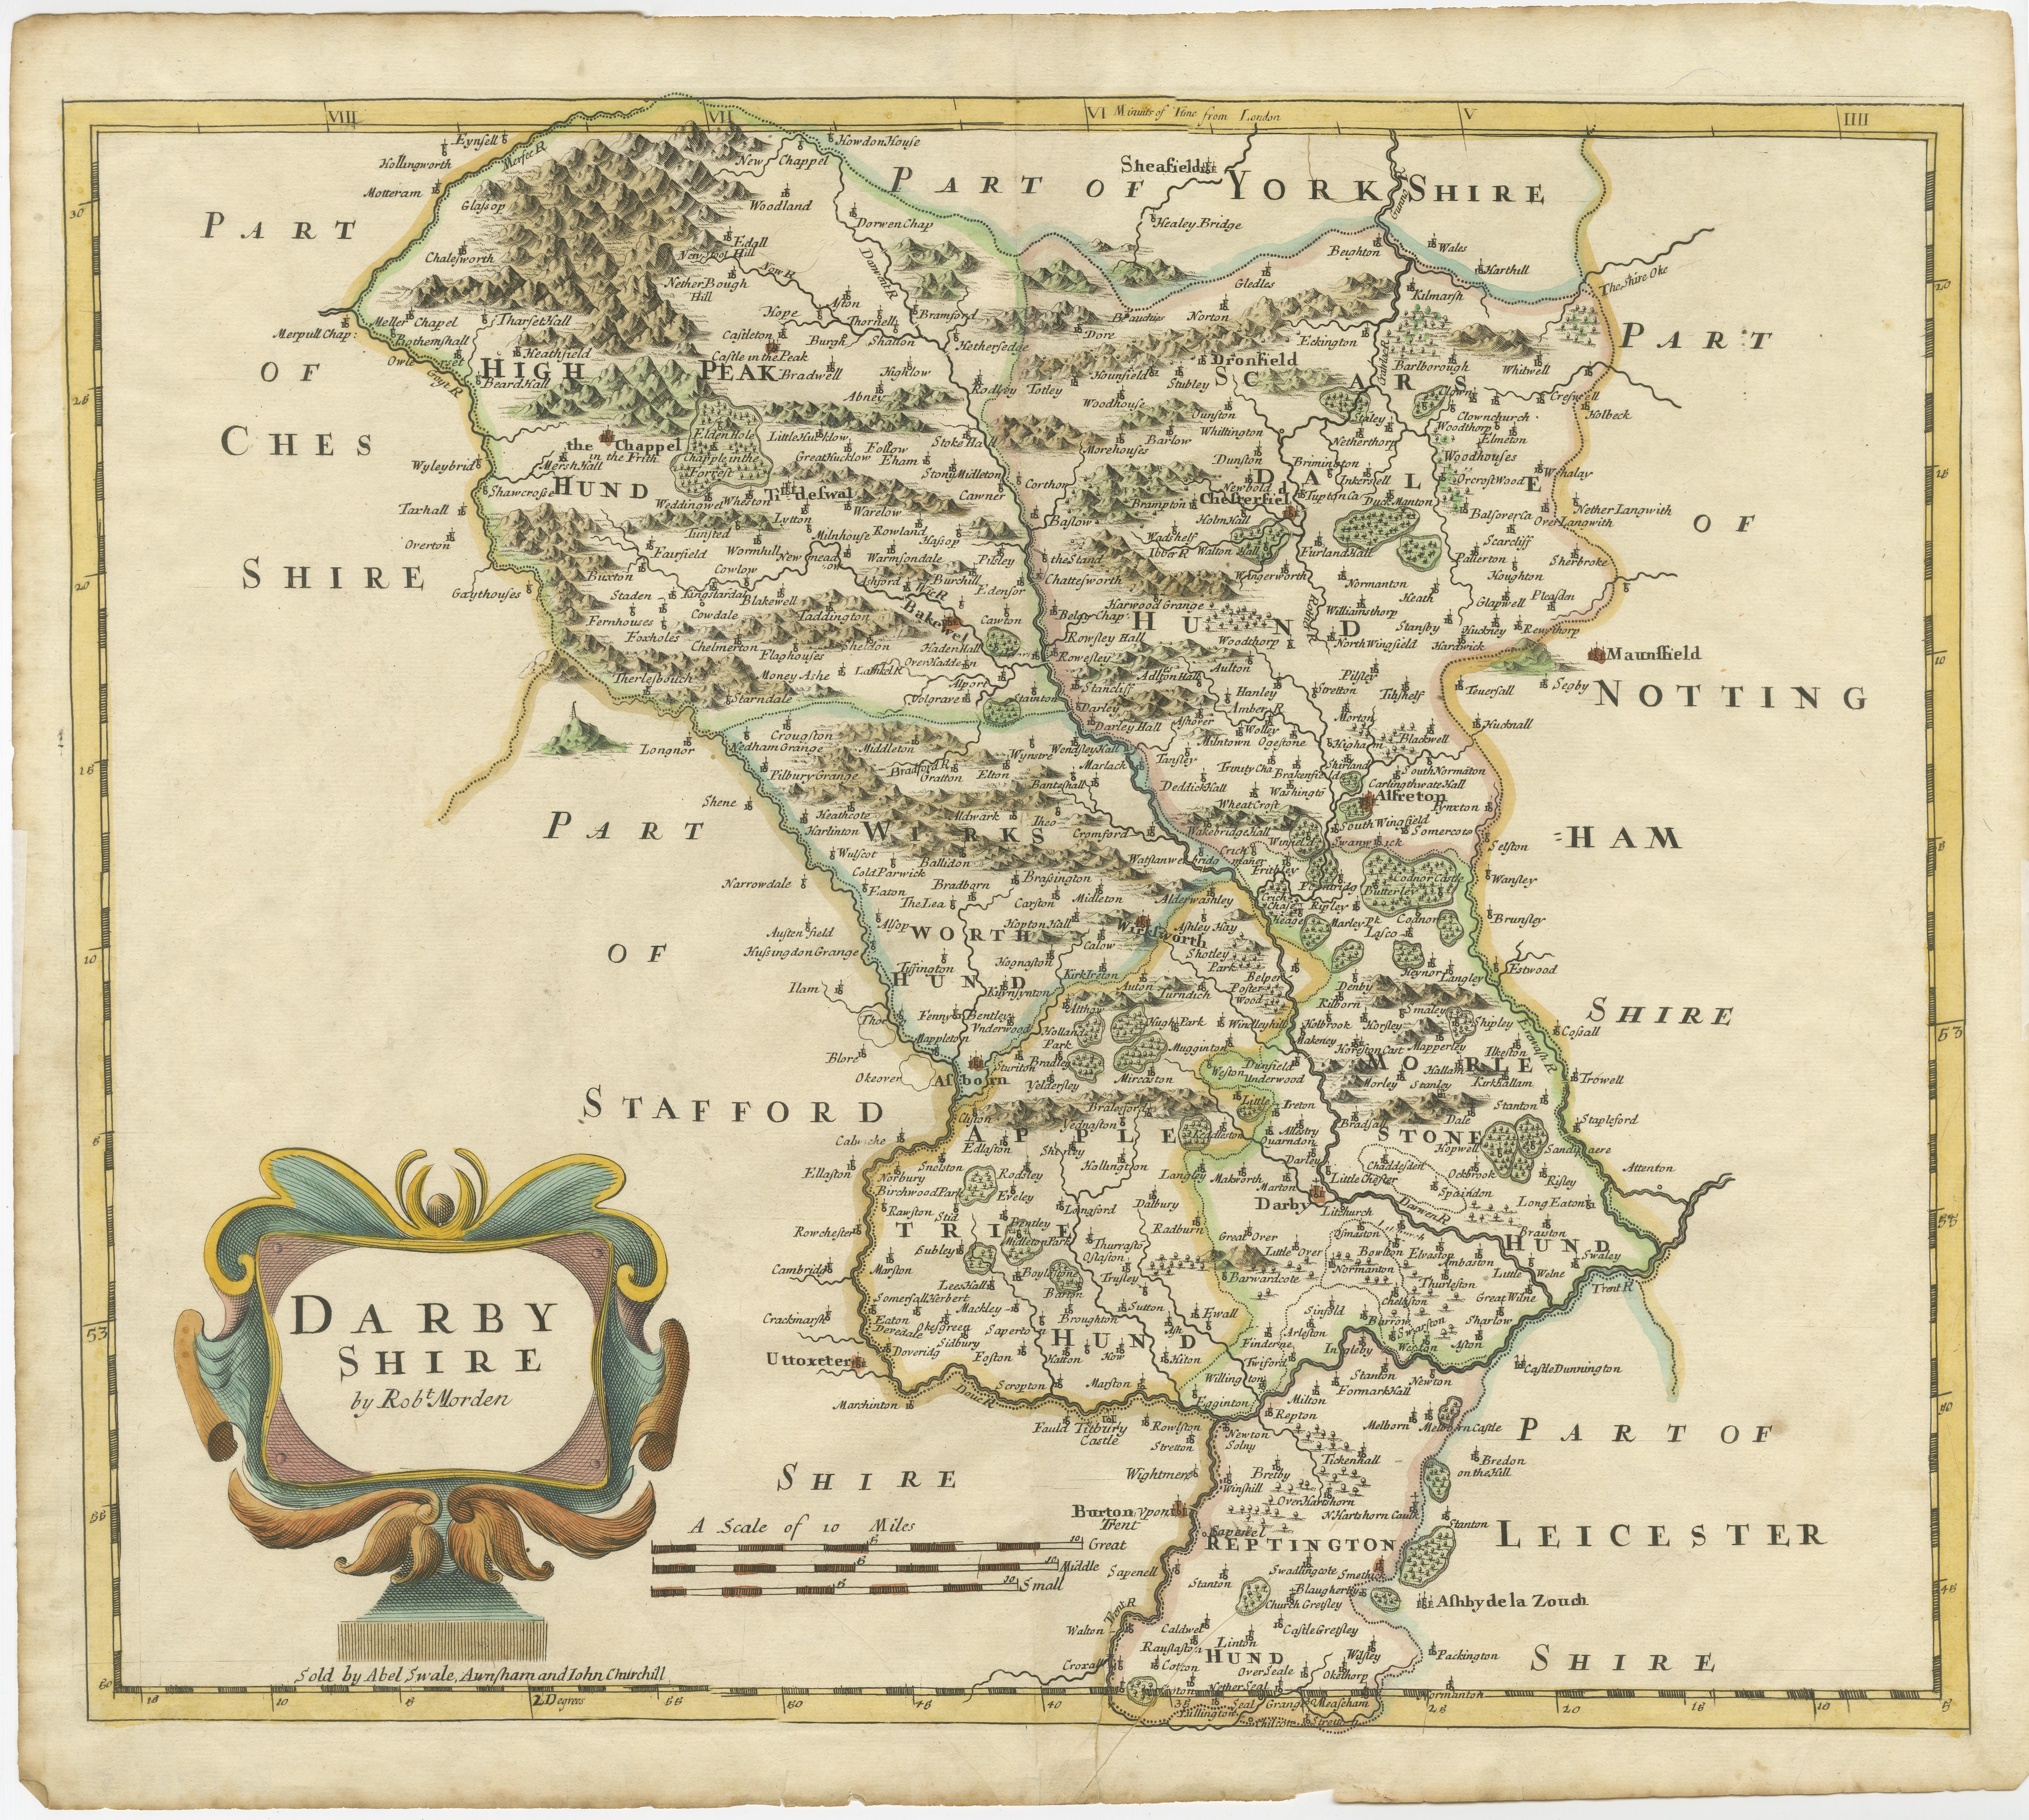 Antique map titled 'Darbyshire'. Original antique map of the country of Derbyshire, England. Engraved by Robert Morden. Sold by Abel Swale, Awnsham and John Churchill. Published circa 1695.